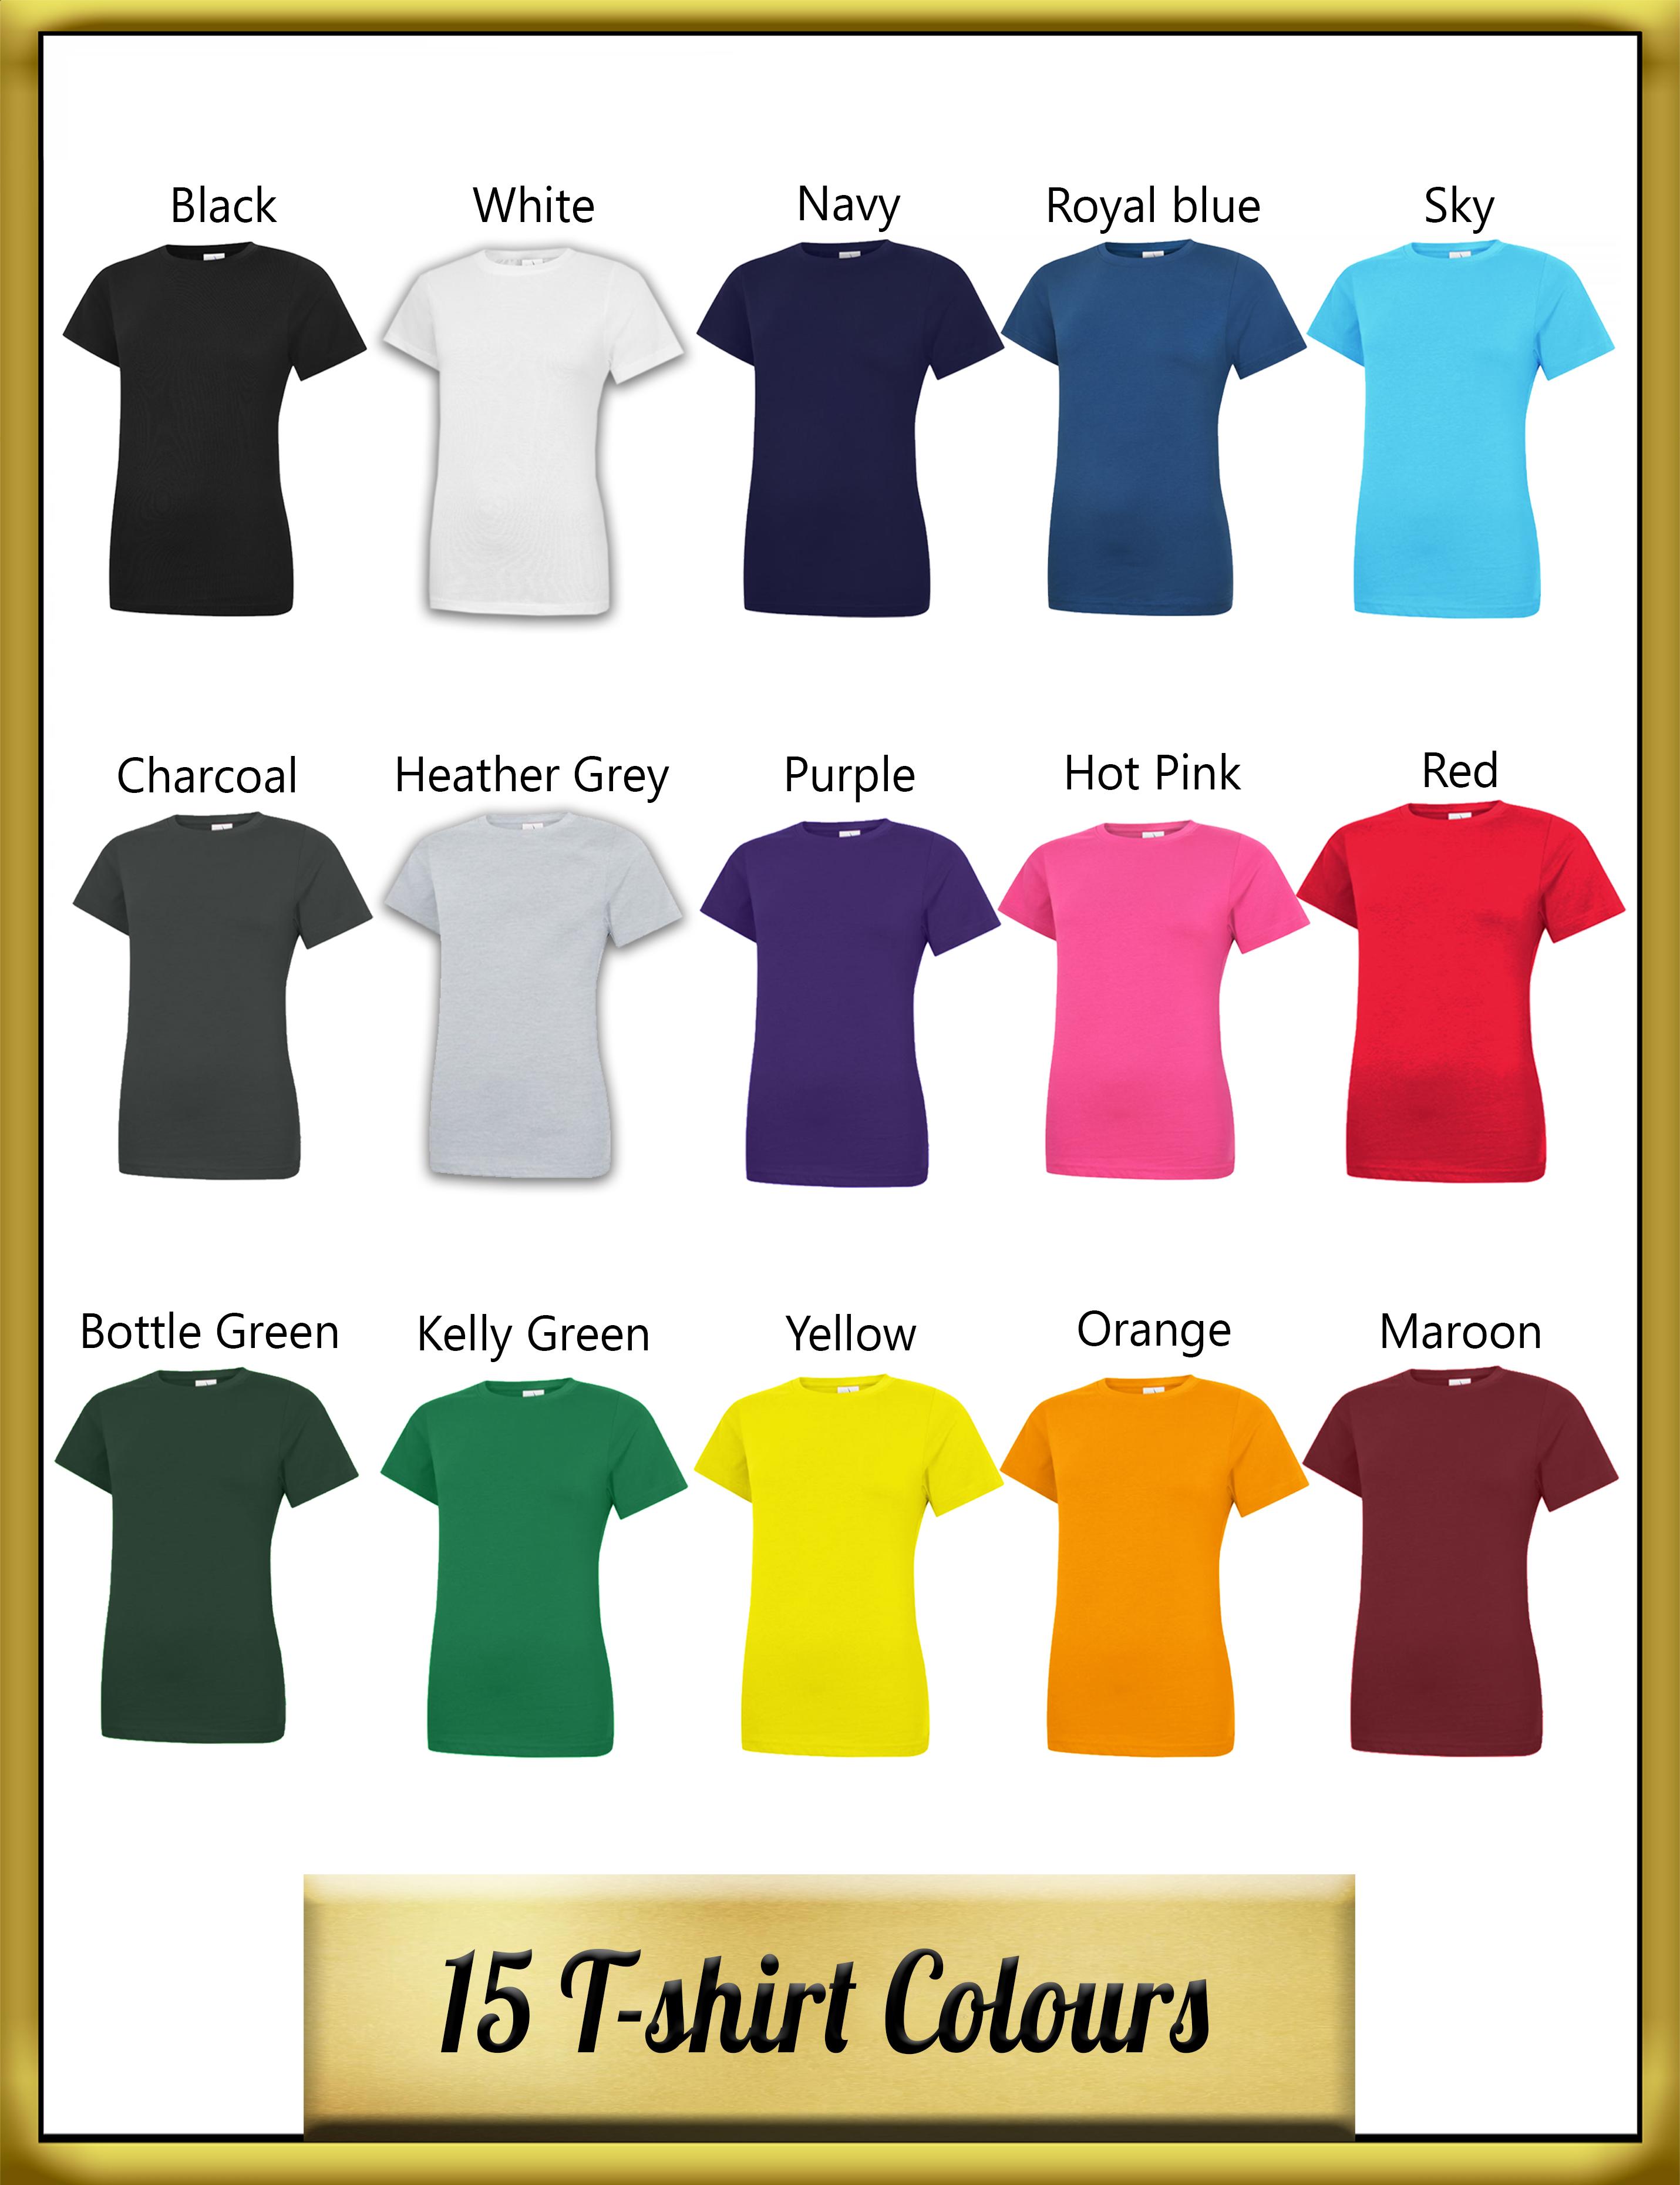 Embroidered Women's T-shirt colours